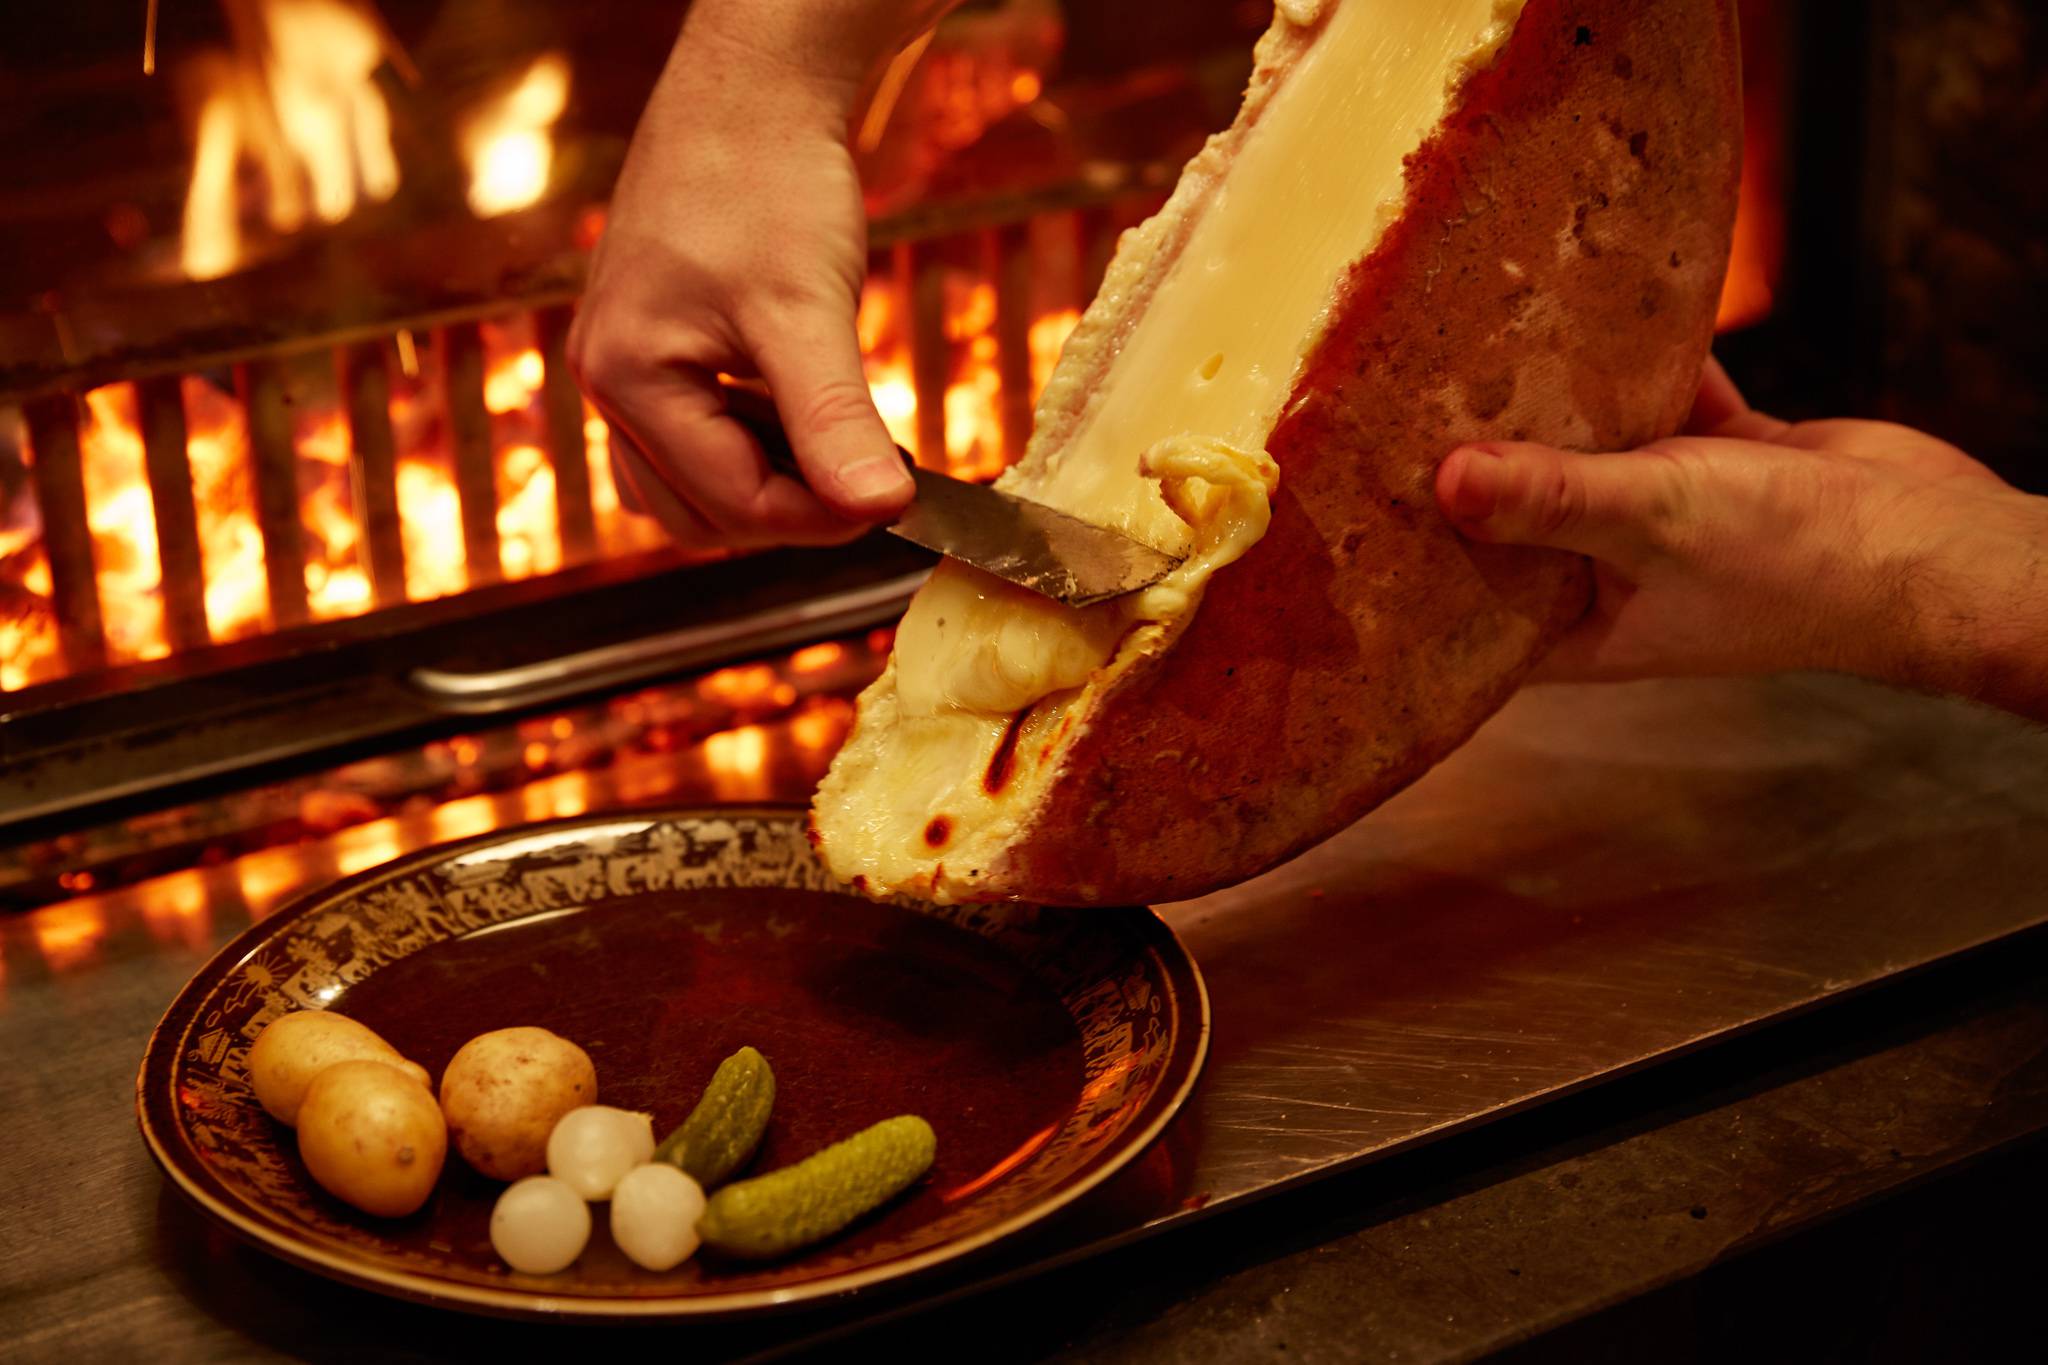 Melted on the wood fire: Swiss Raclette "on fire" - Hotel Gstaaderhof